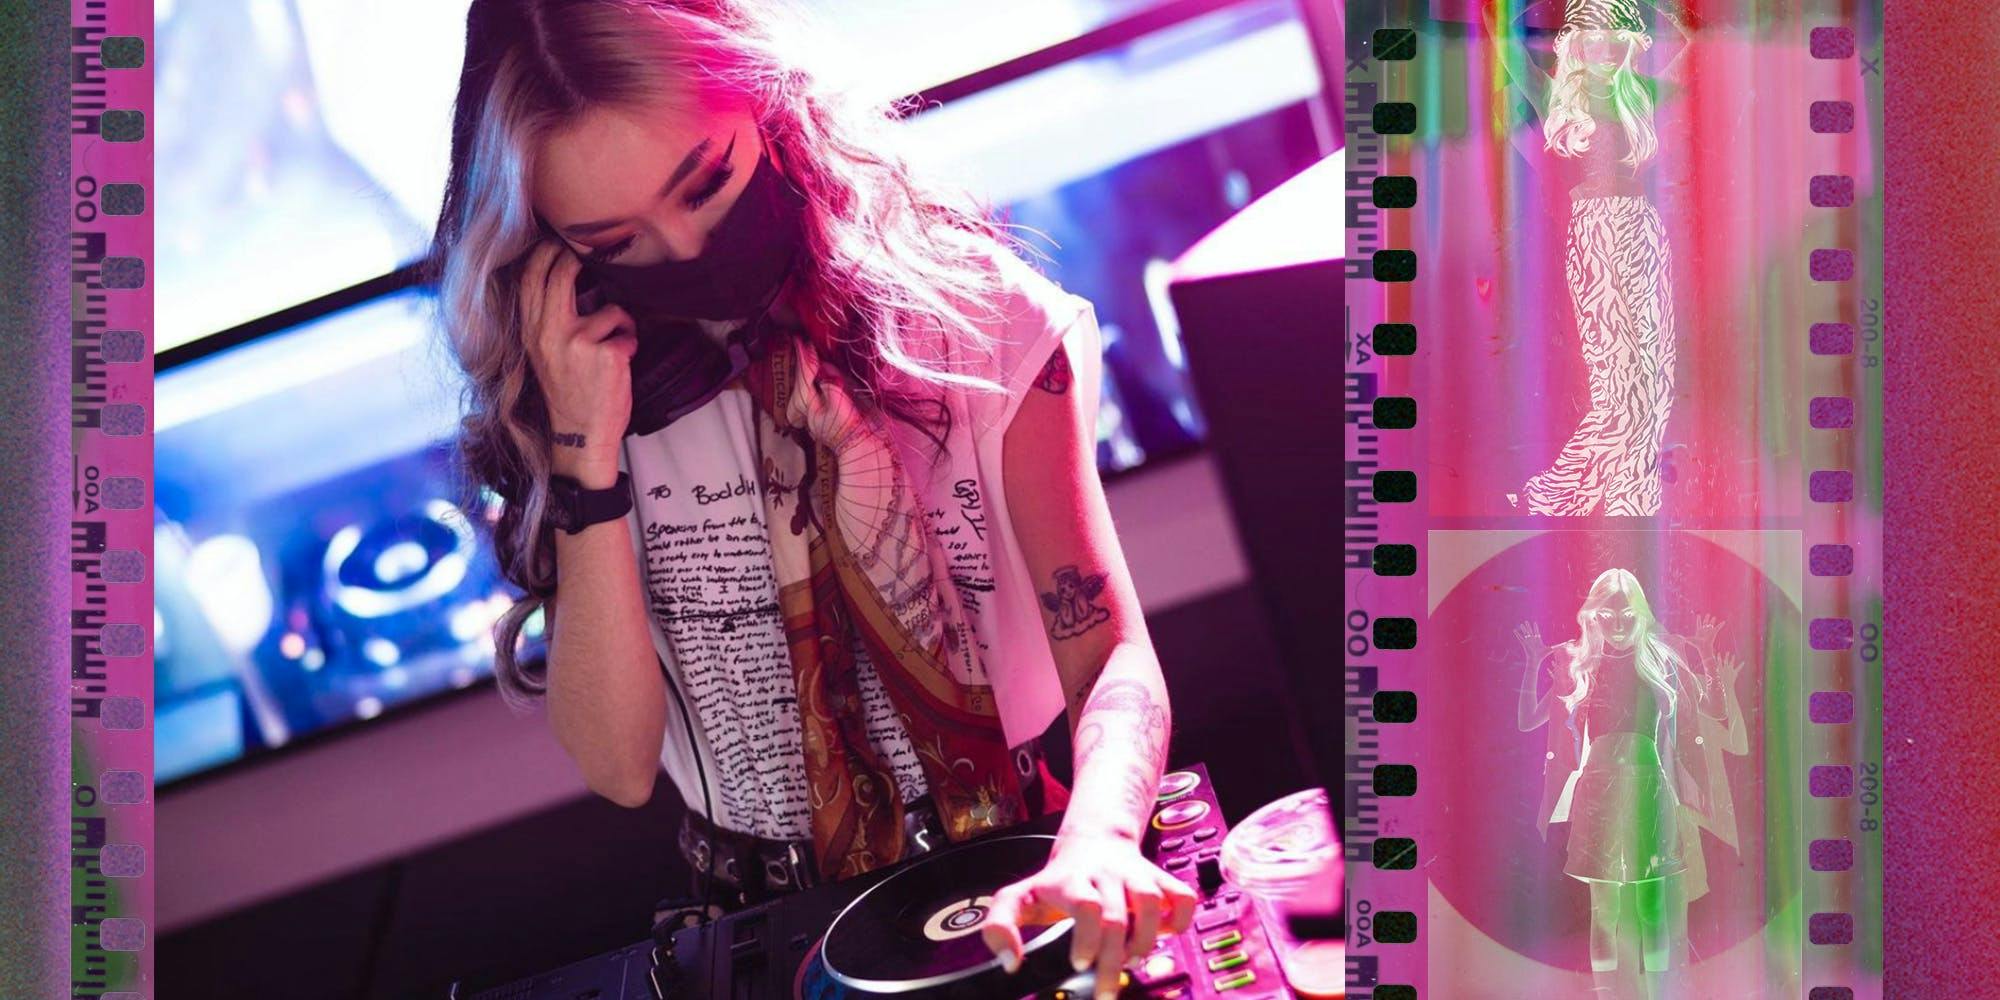 ‘It takes a lot of time and patience’: TikTok DJ Jovynn shares how she got over 8 million fanatic followers